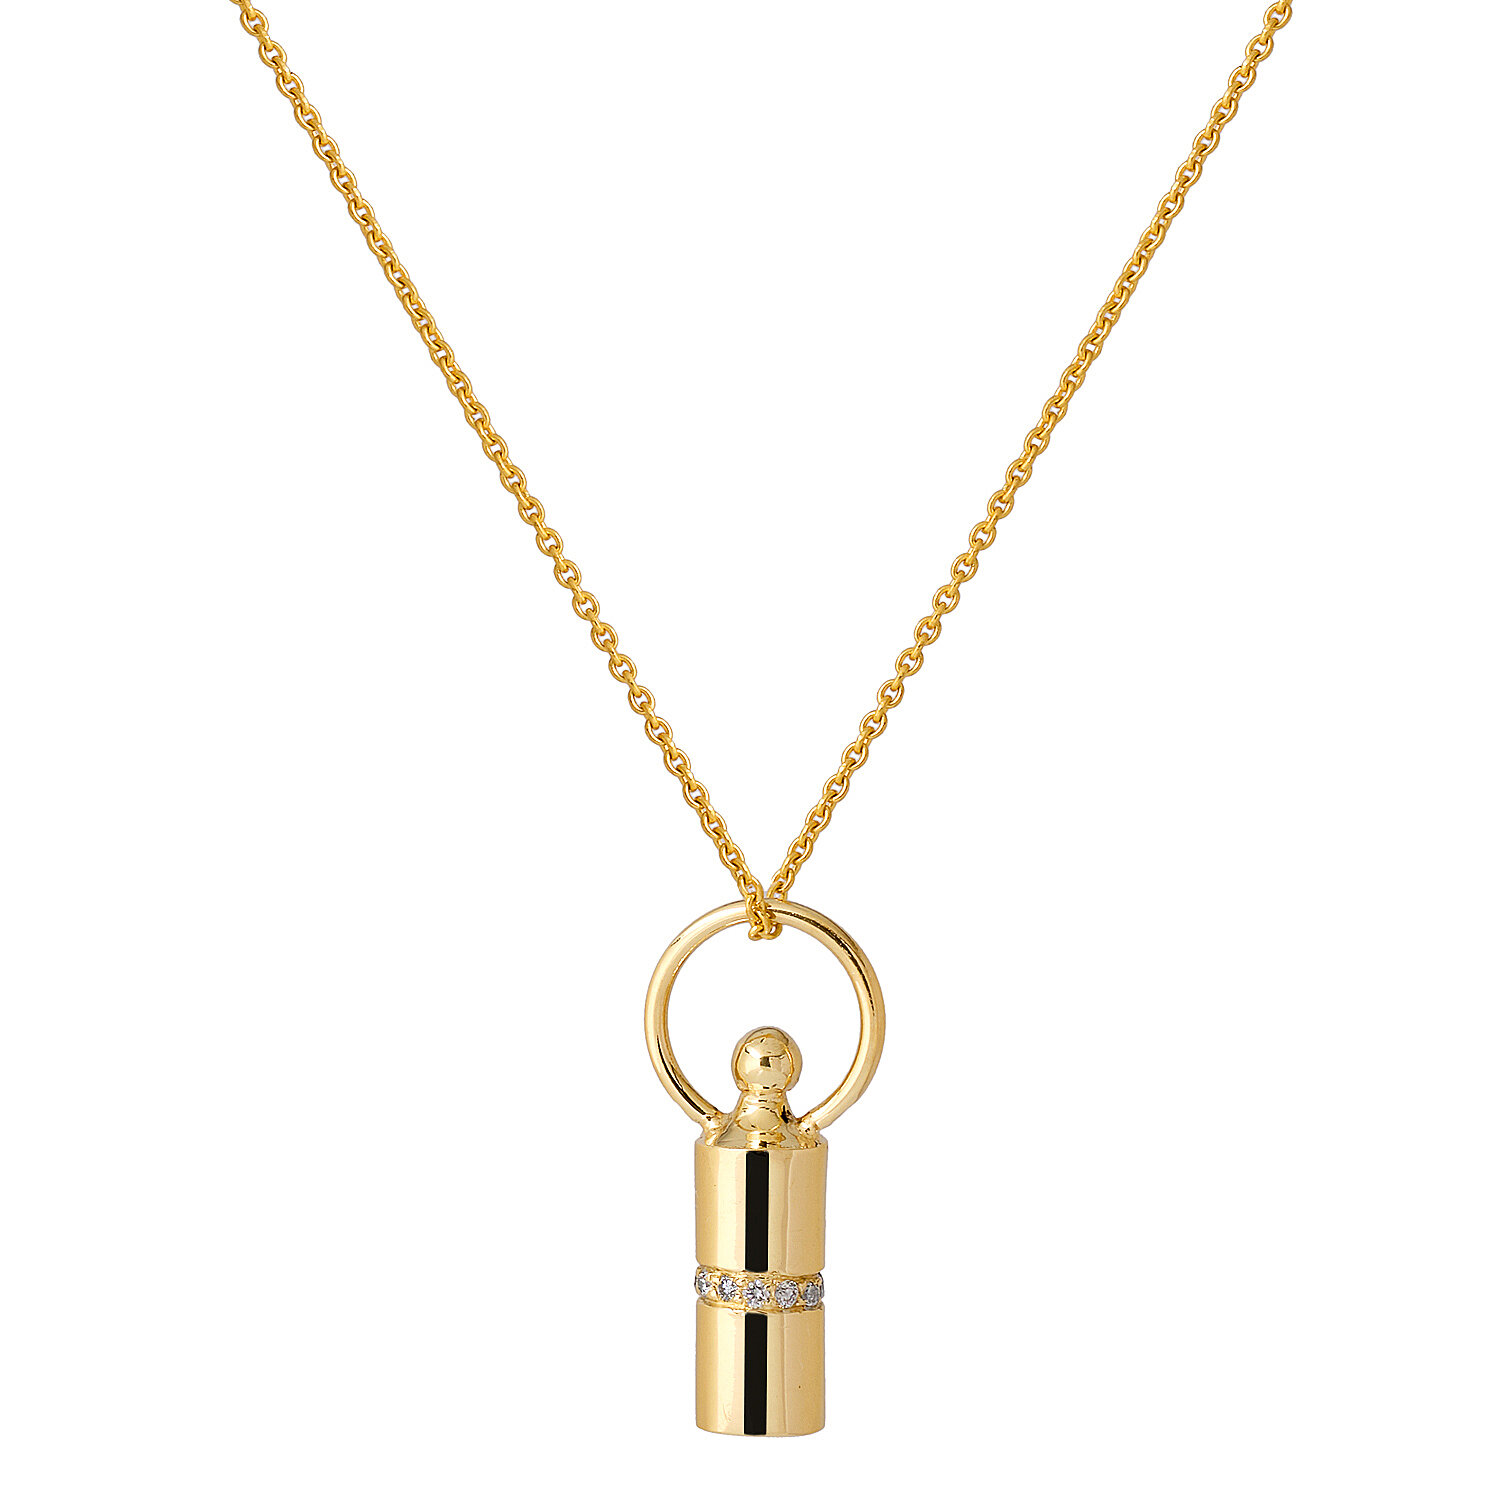 Necklaces & Pendants for Women | Dorka S. Jewelry - Big Ball Chain Necklace, Gold